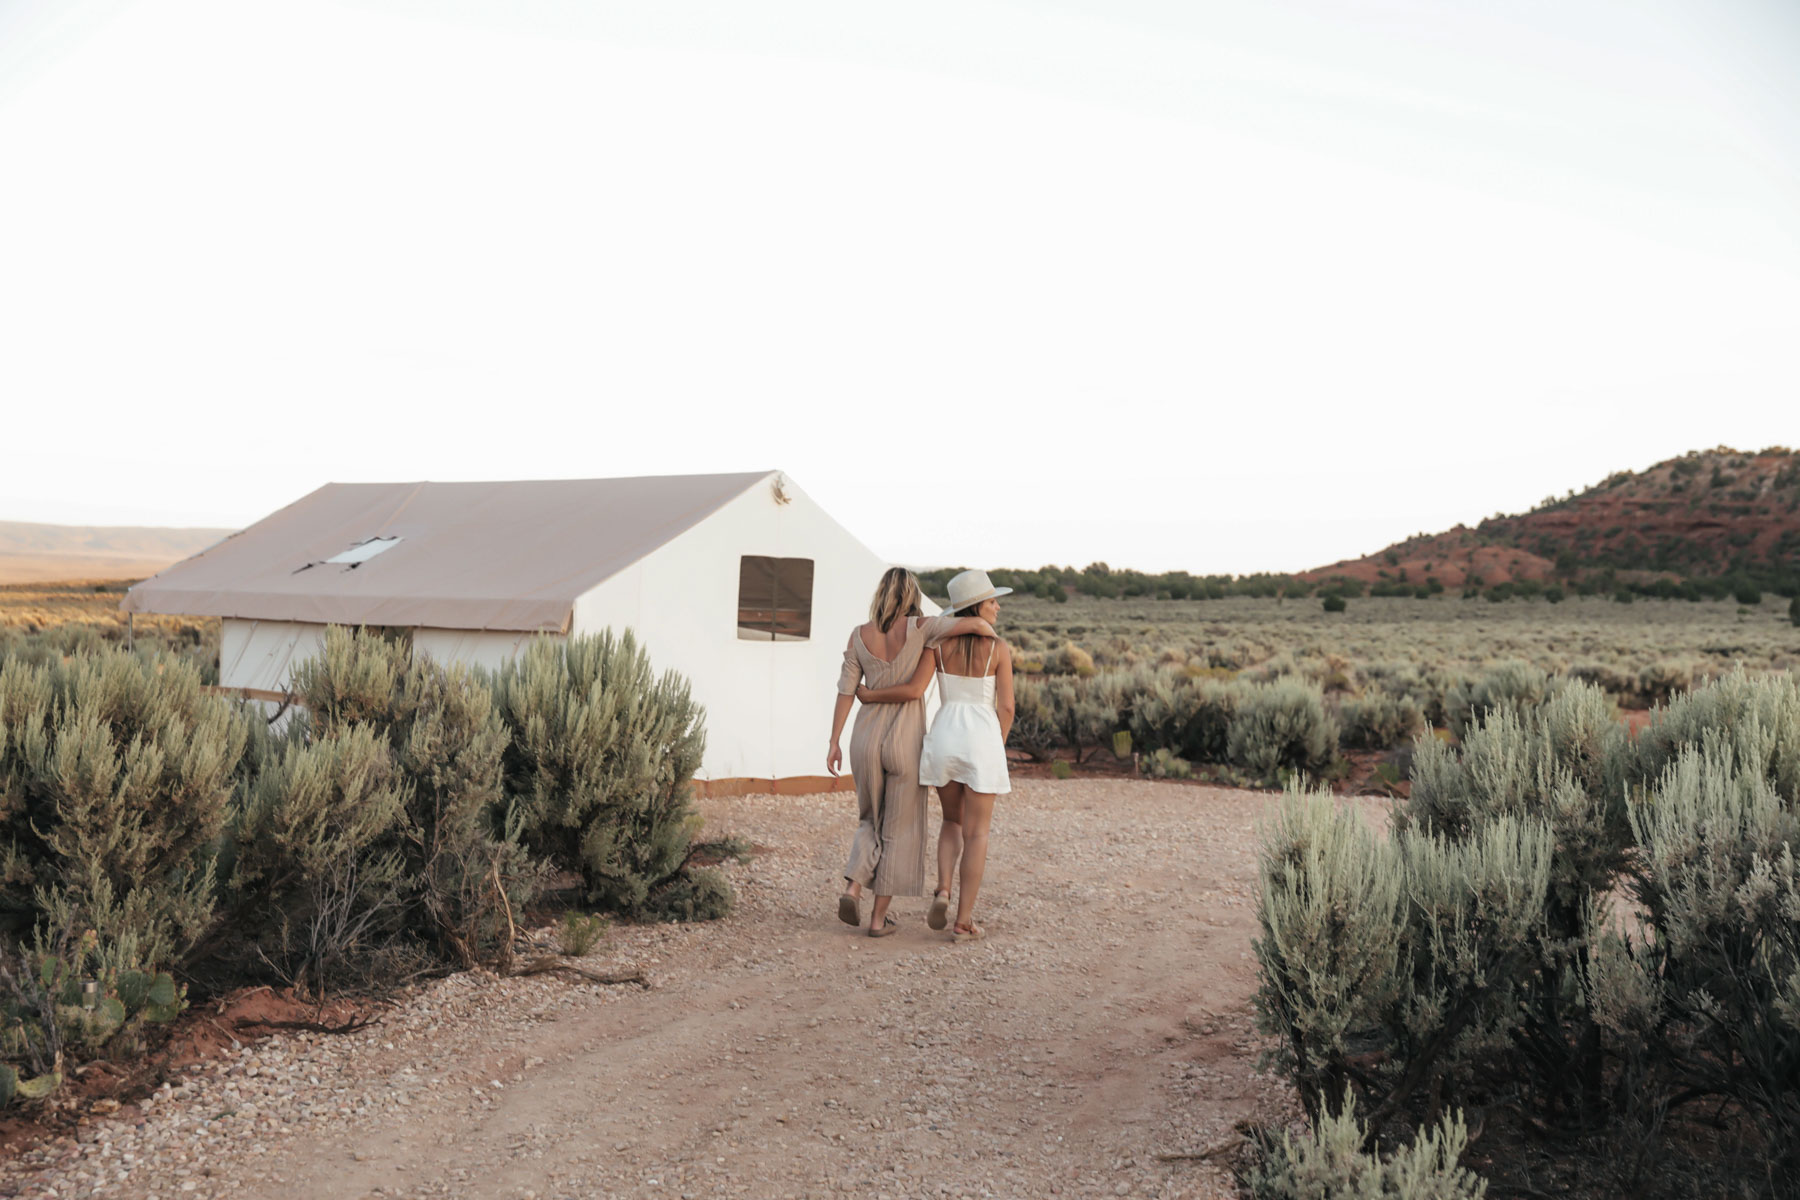 southwest road trip to Basecamp37 glamping in Kanab, Arizona with Urban Outfitters